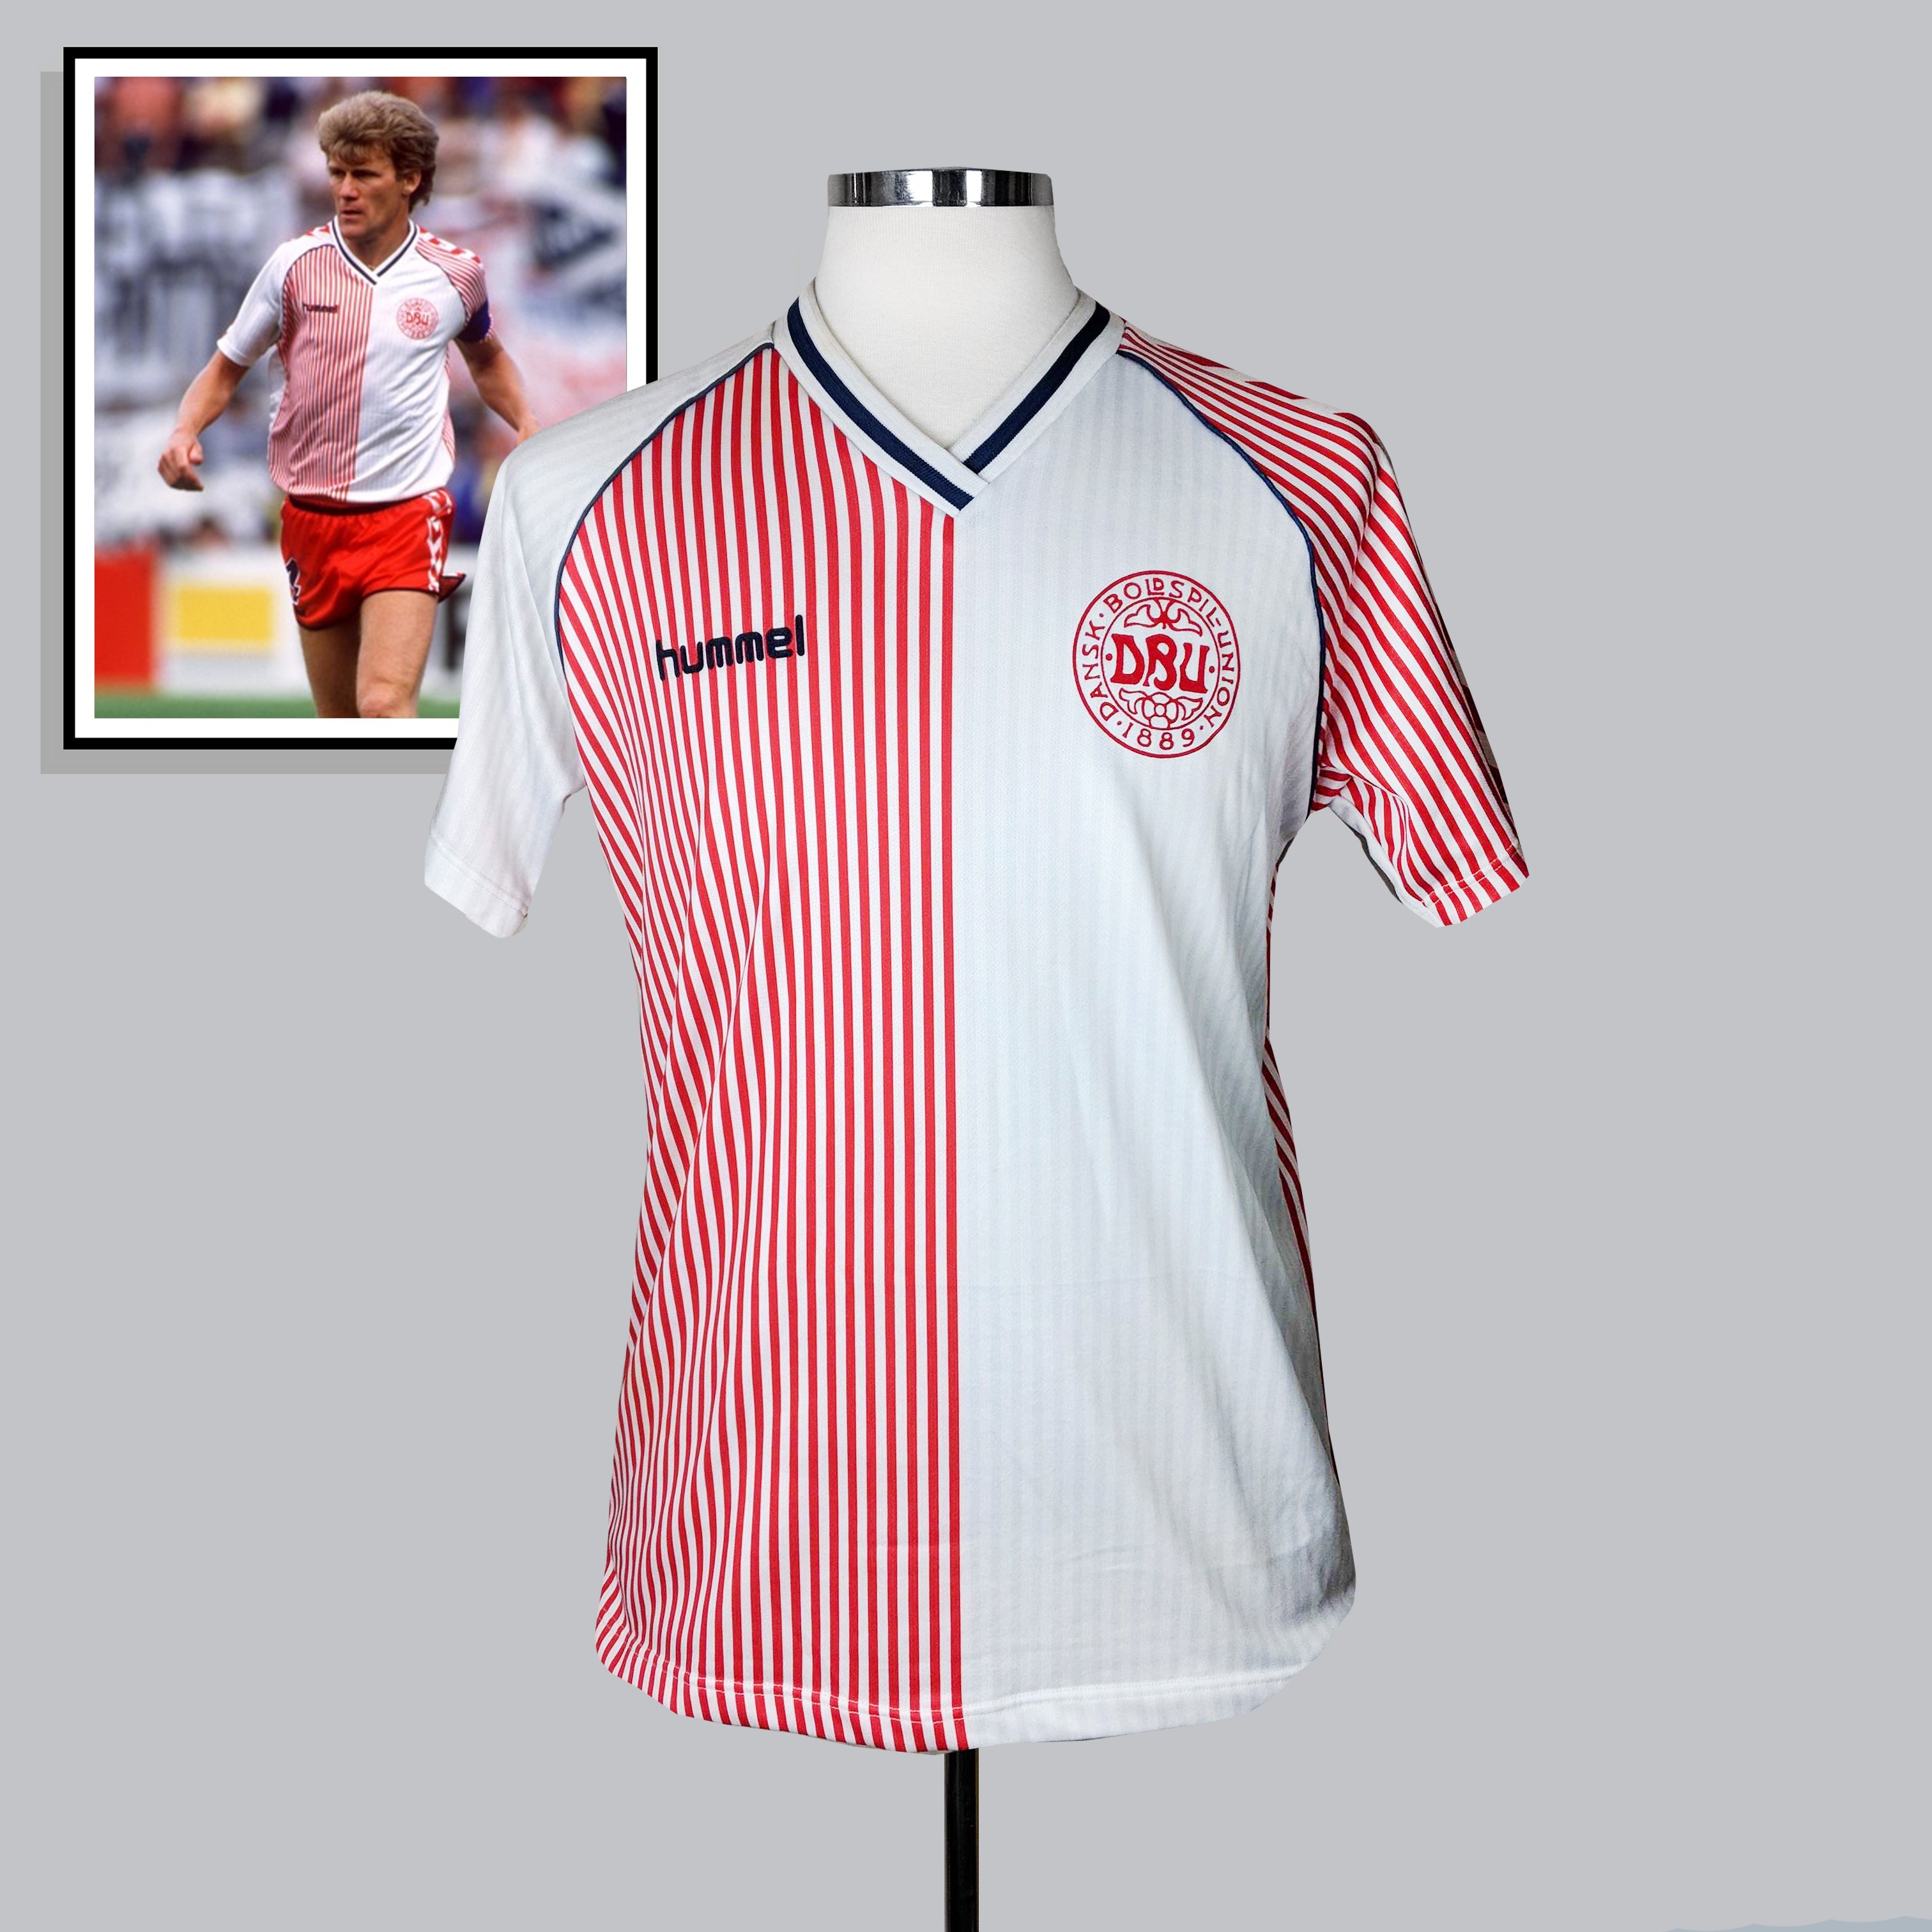 Classic Shirts on Twitter: "Hummel 1986 most famously wore this amazing Hummel design at World Cup '86 where they topped the group beating West Germany and Uruguay convincingly in the